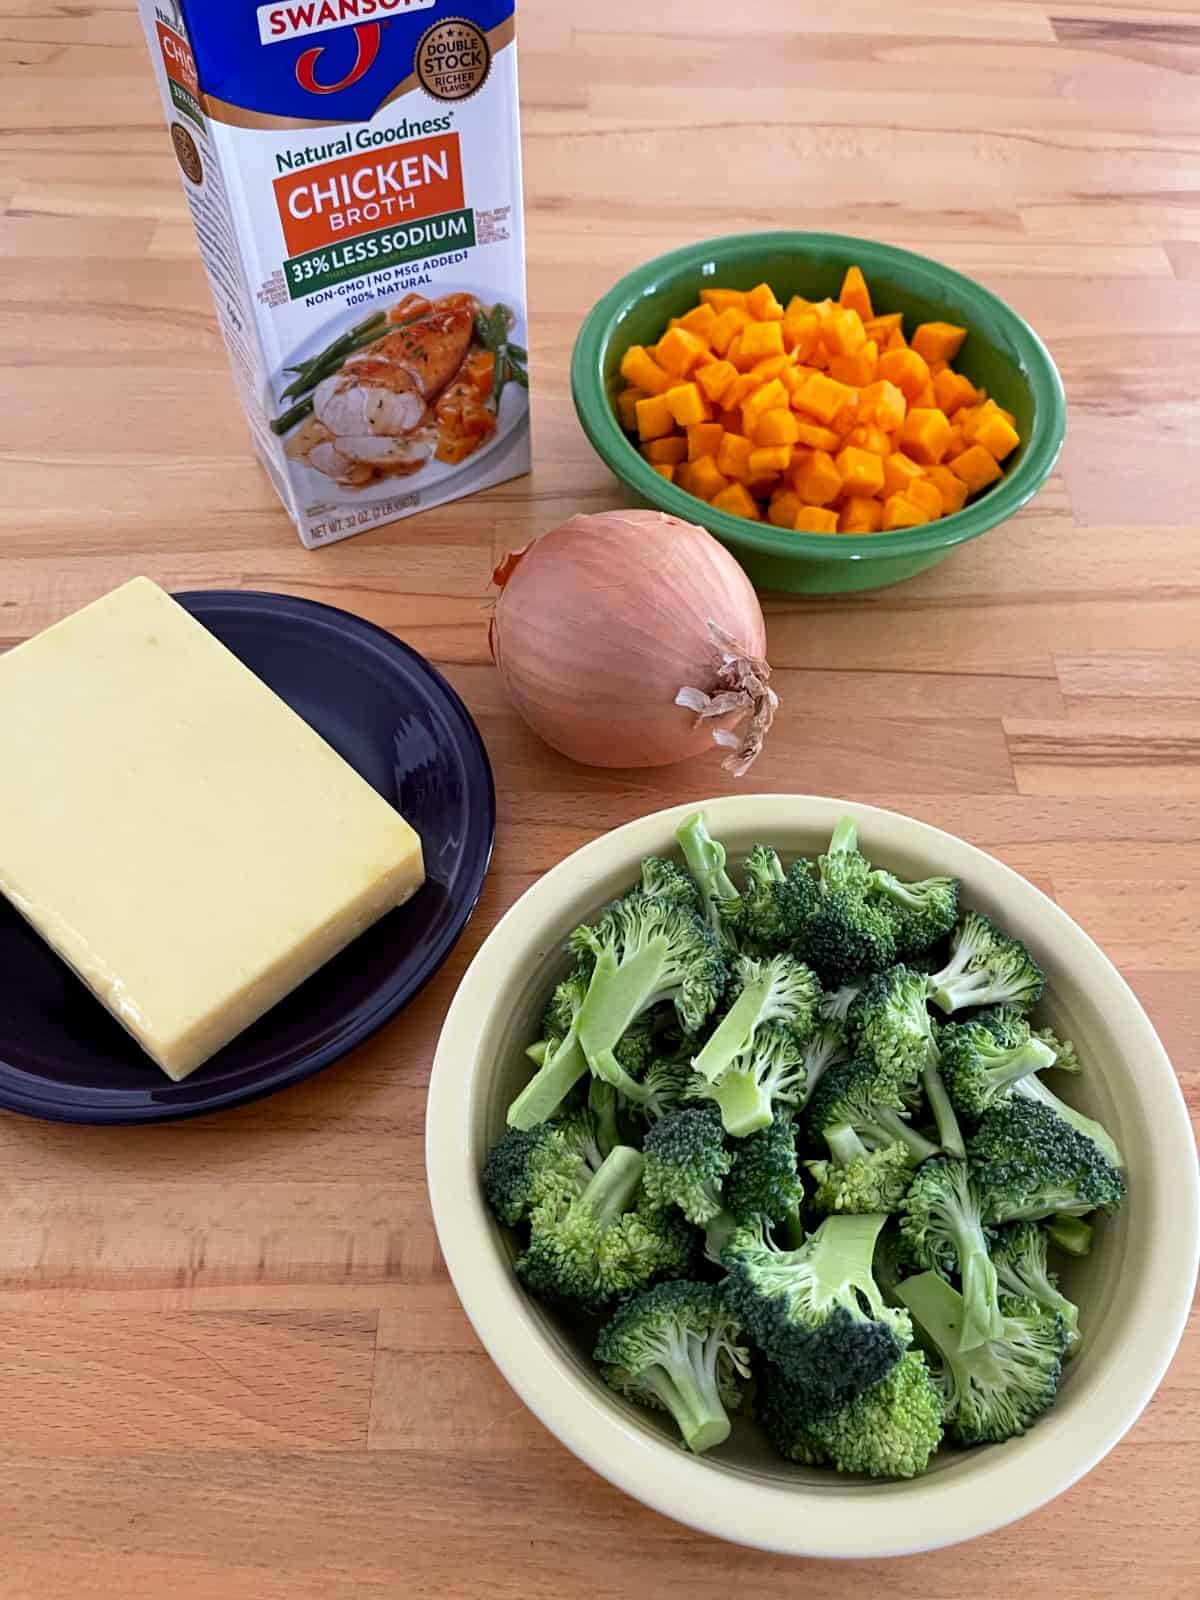 Ingredients for making soup, including broccoli florets, cheddar cheese, onion, butternut squash and chicken broth on wooden table.